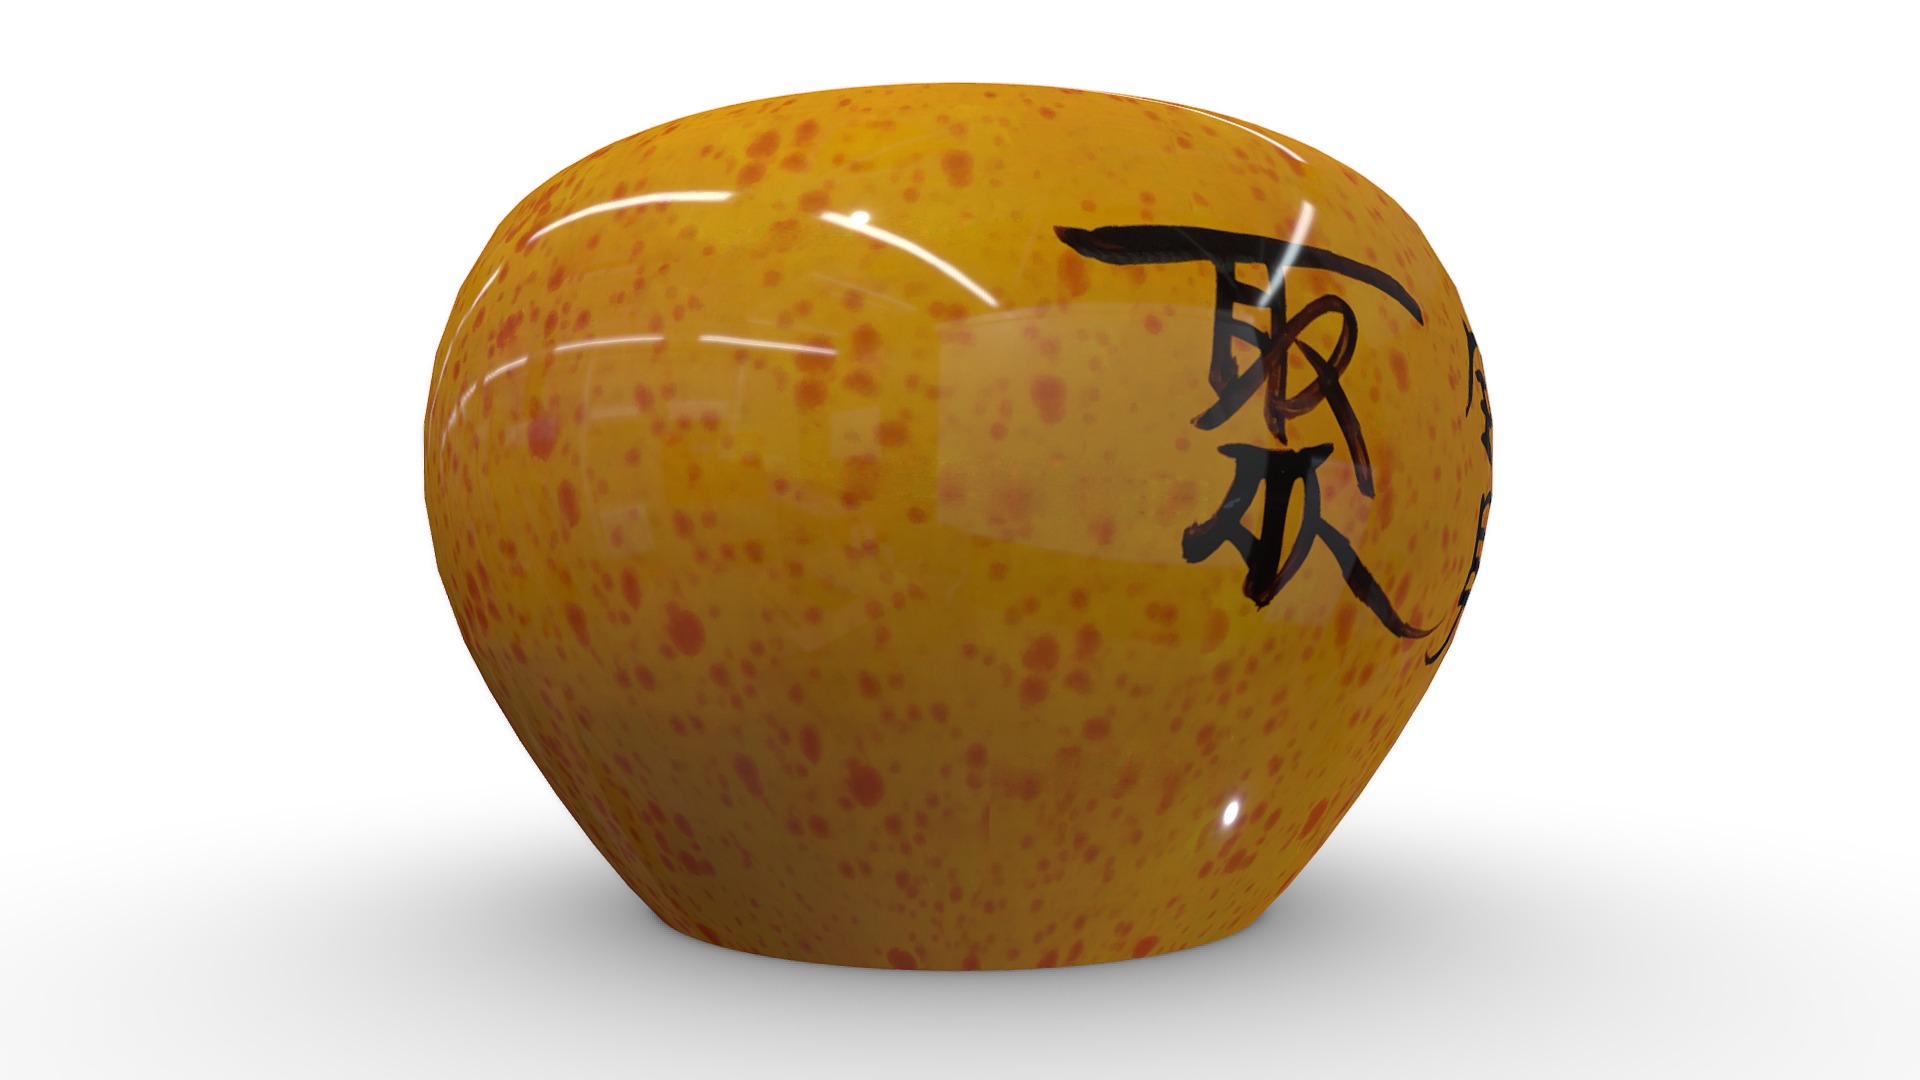 3D model 【3D模擬-董大師】迷你小黃盆展示 - This is a 3D model of the 【3D模擬-董大師】迷你小黃盆展示. The 3D model is about a yellow egg with a drawing on it.